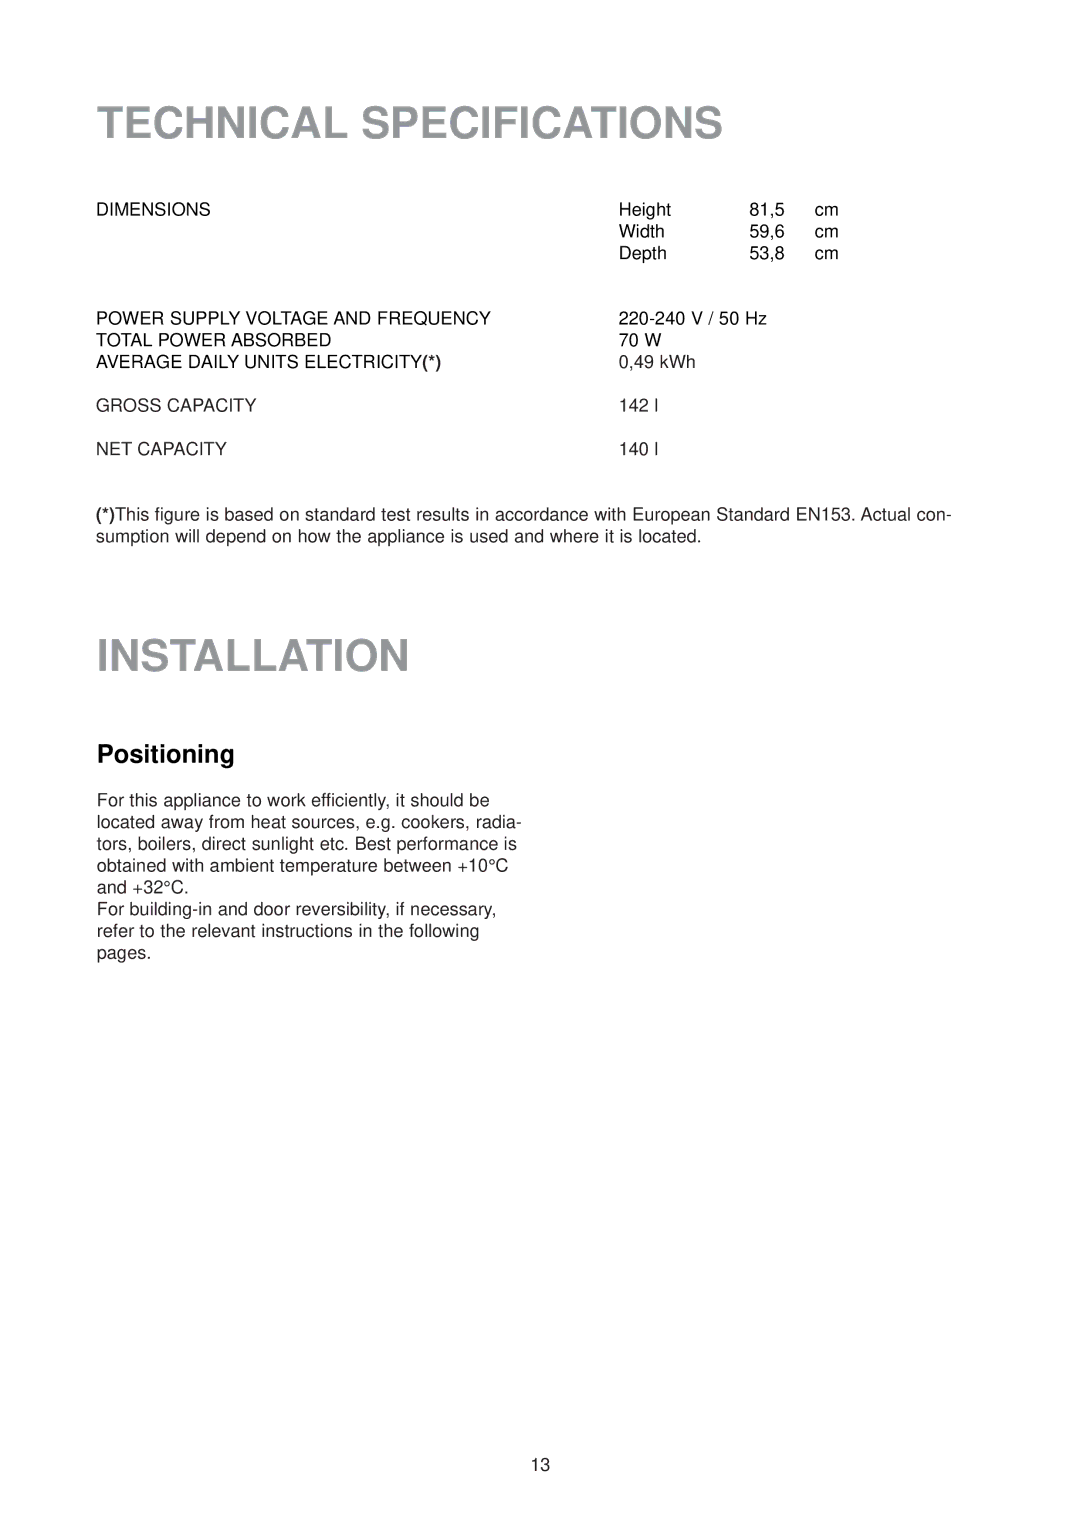 Zanussi ZU 9154 manual Technical Specifications, Installation, Positioning 